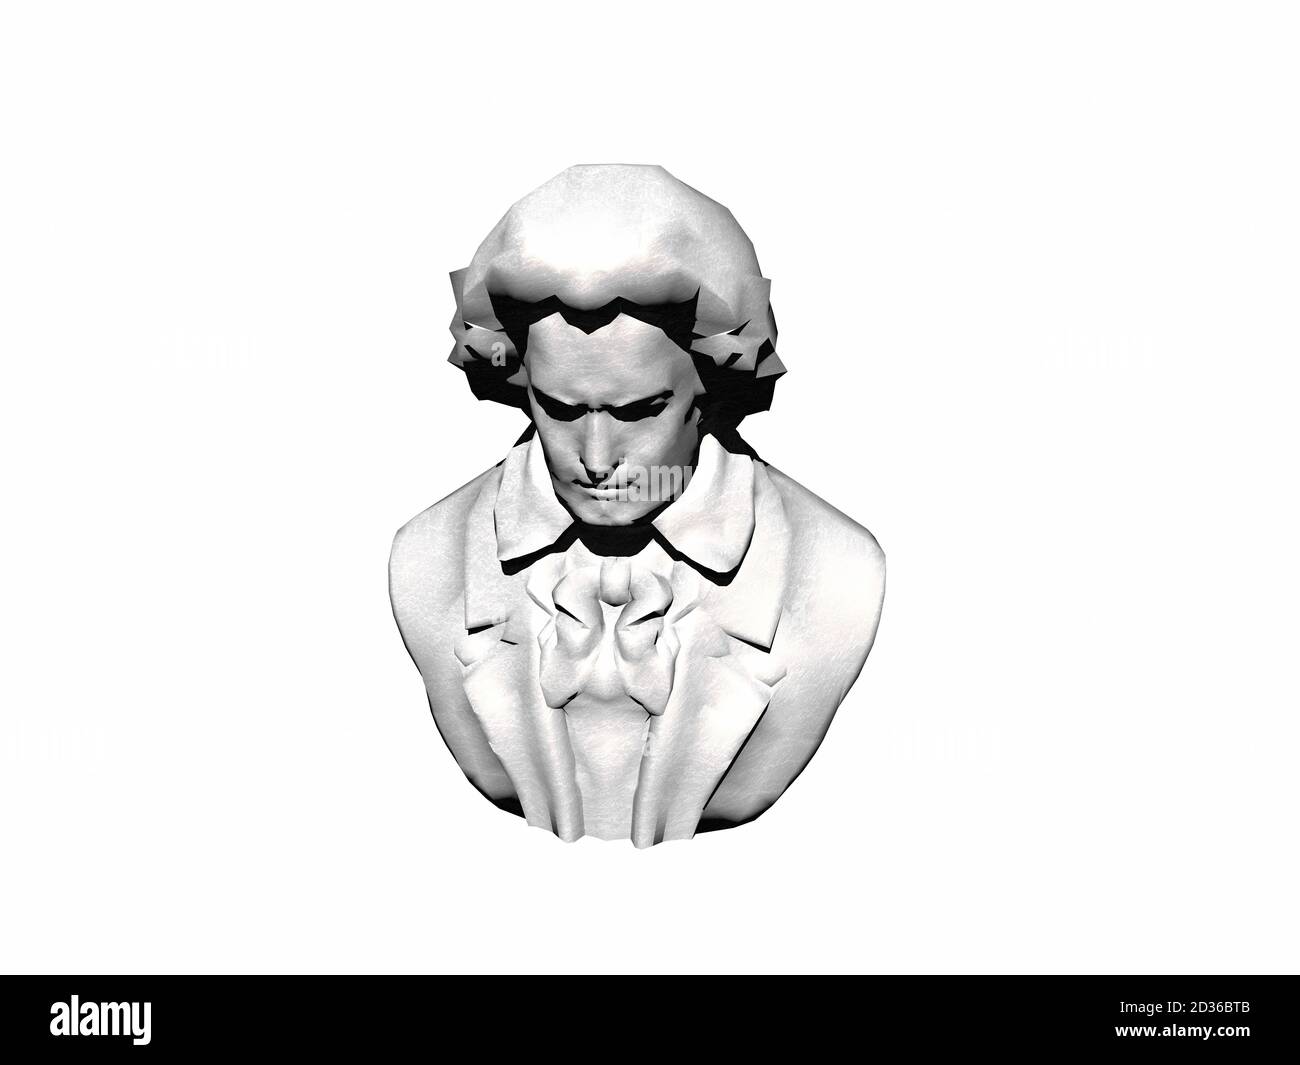 Beethoven bust made of stone Stock Photo